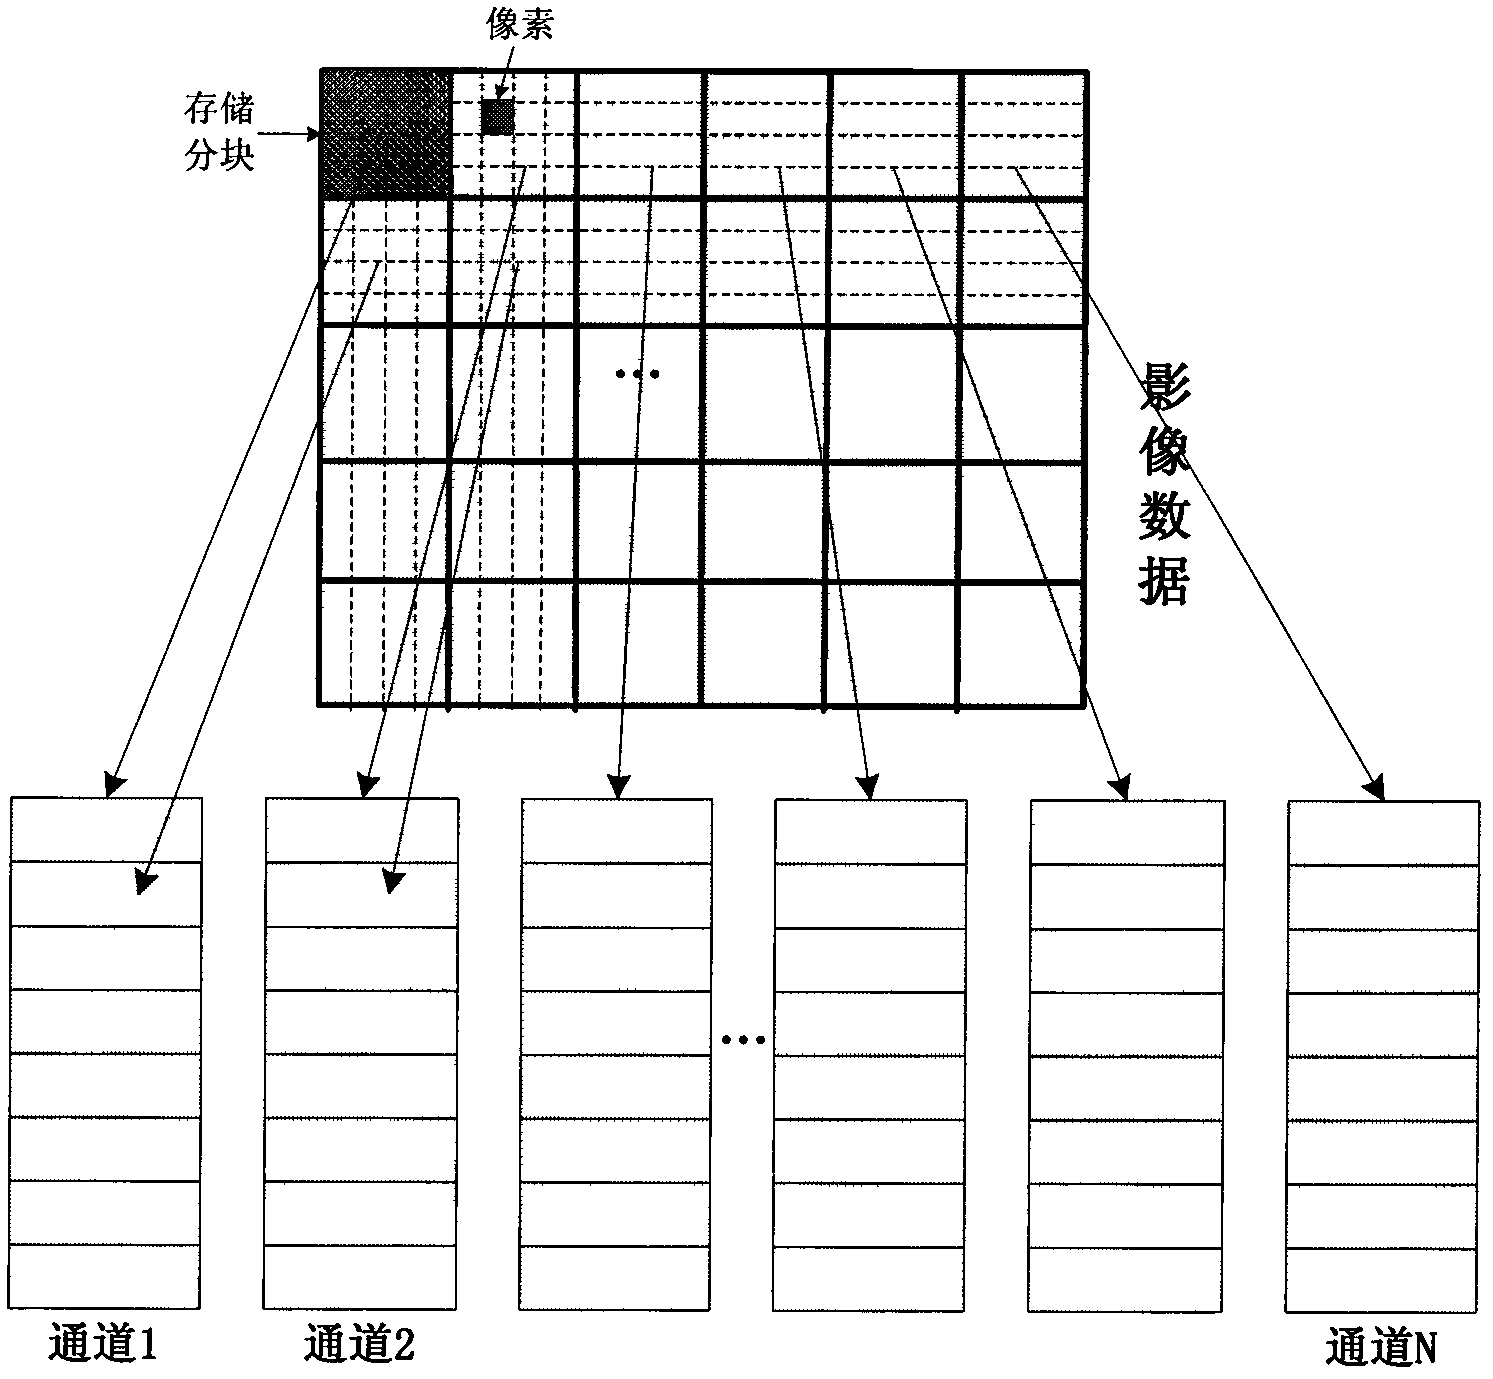 Solid state disk for rapidly storing and displaying massive image data